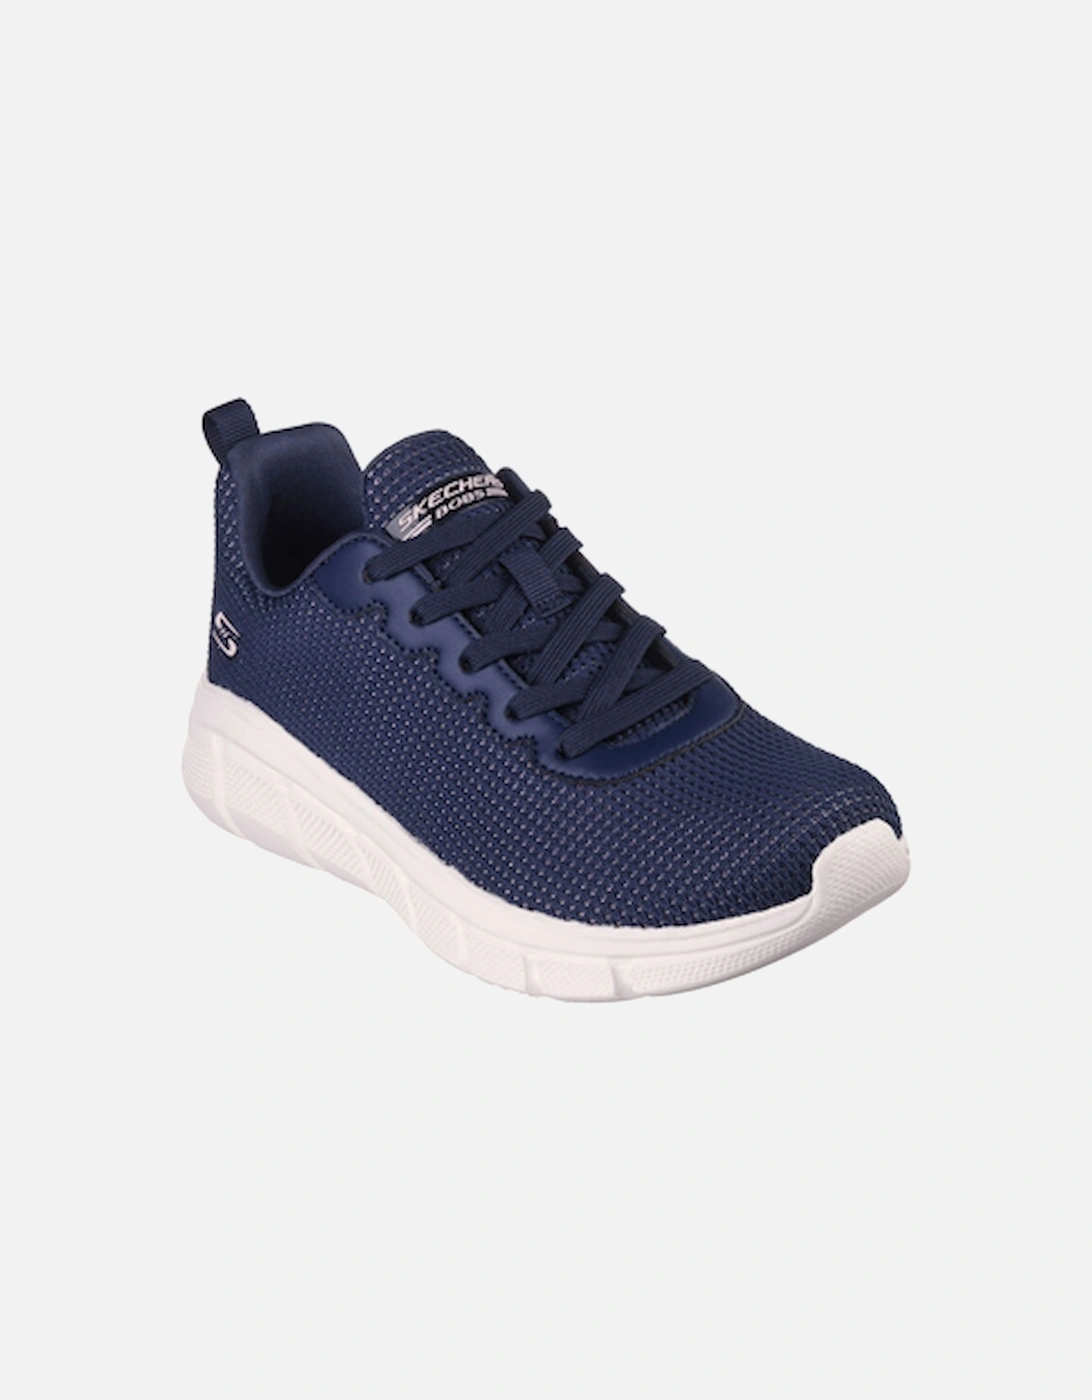 Women's Bobs B Flex Visionary Essence Lace Up Sneaker Navy, 6 of 5